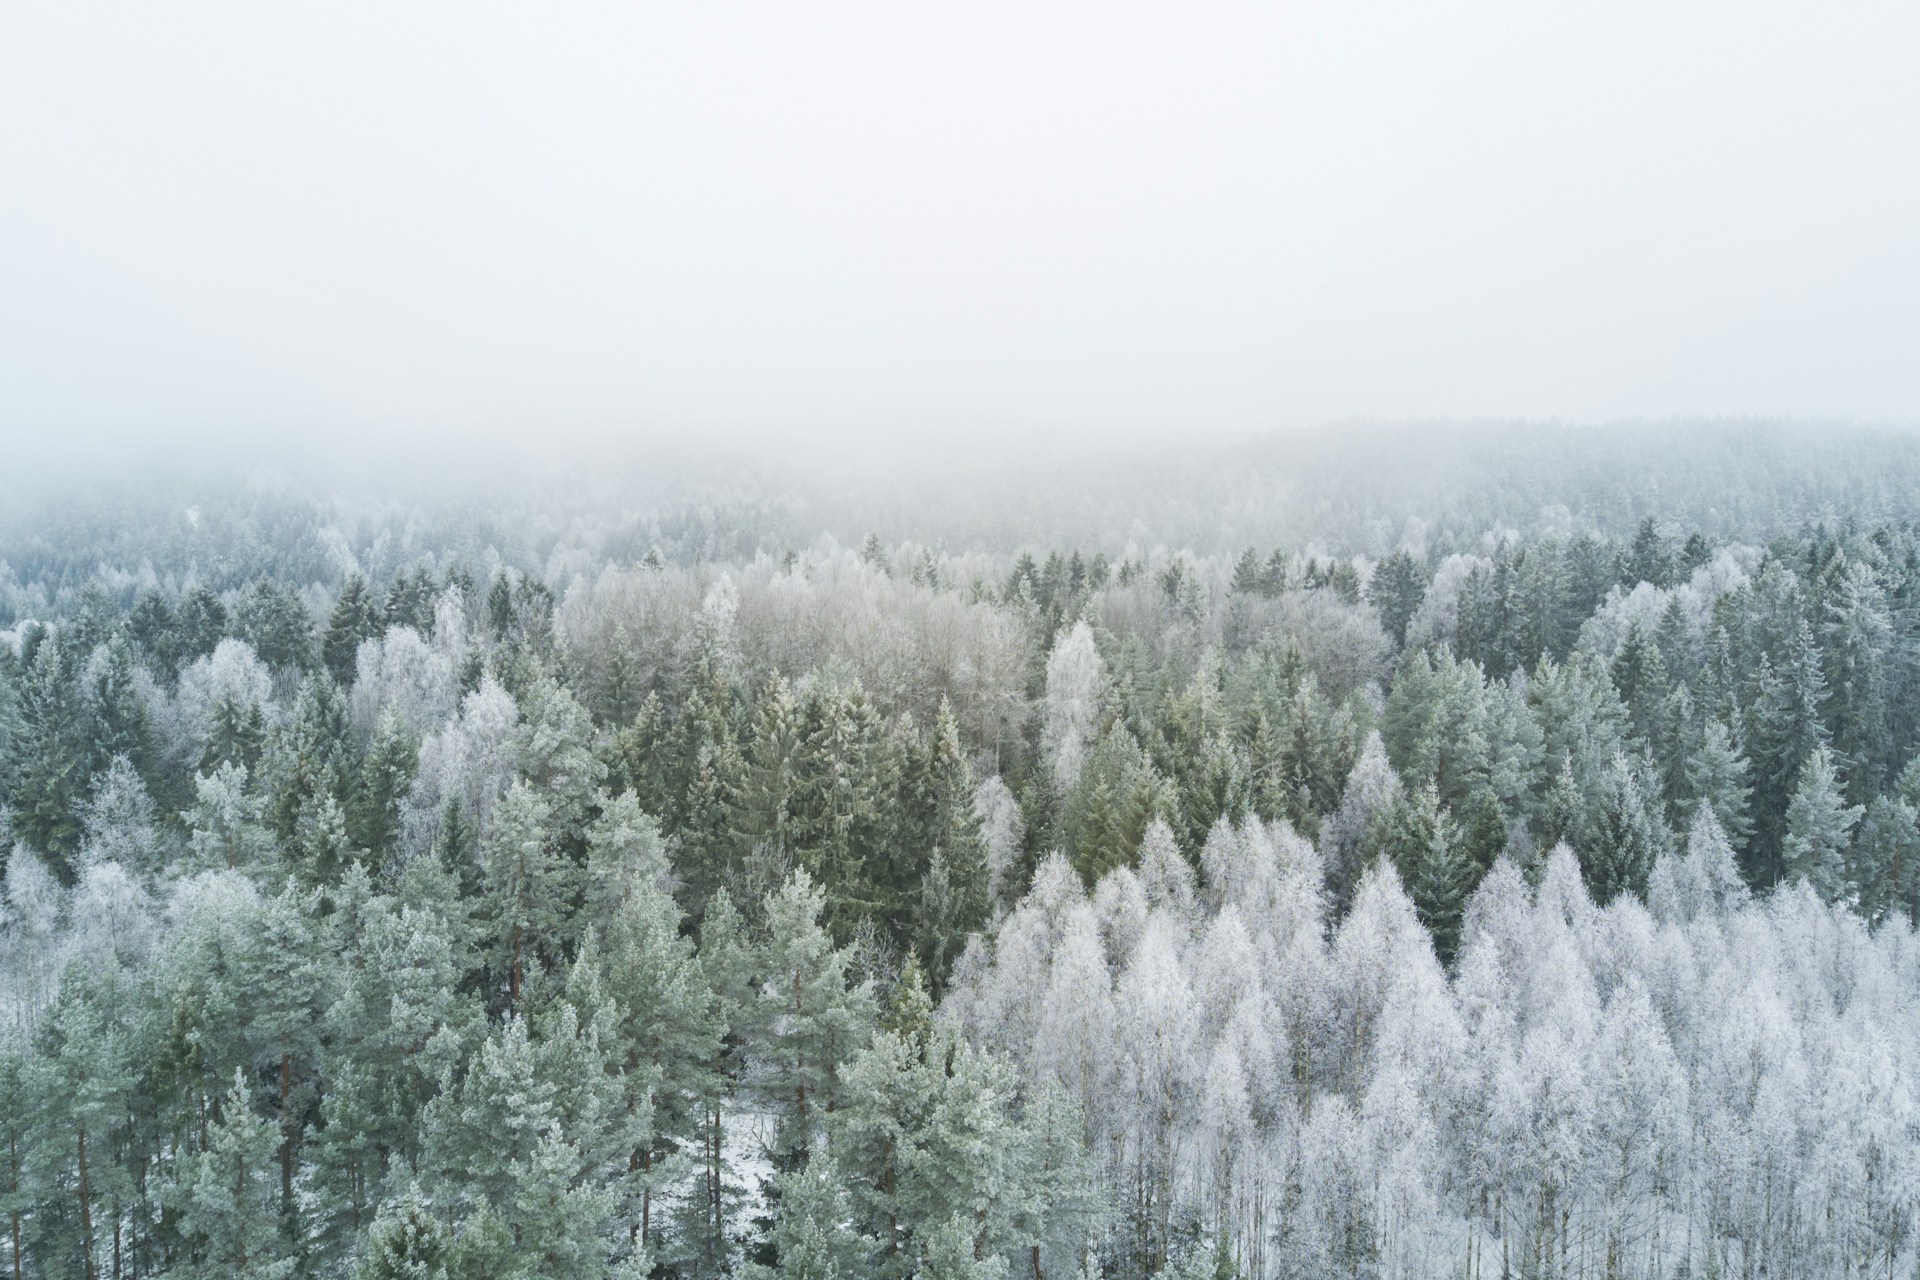 bird's eye view photography of pine trees during winter